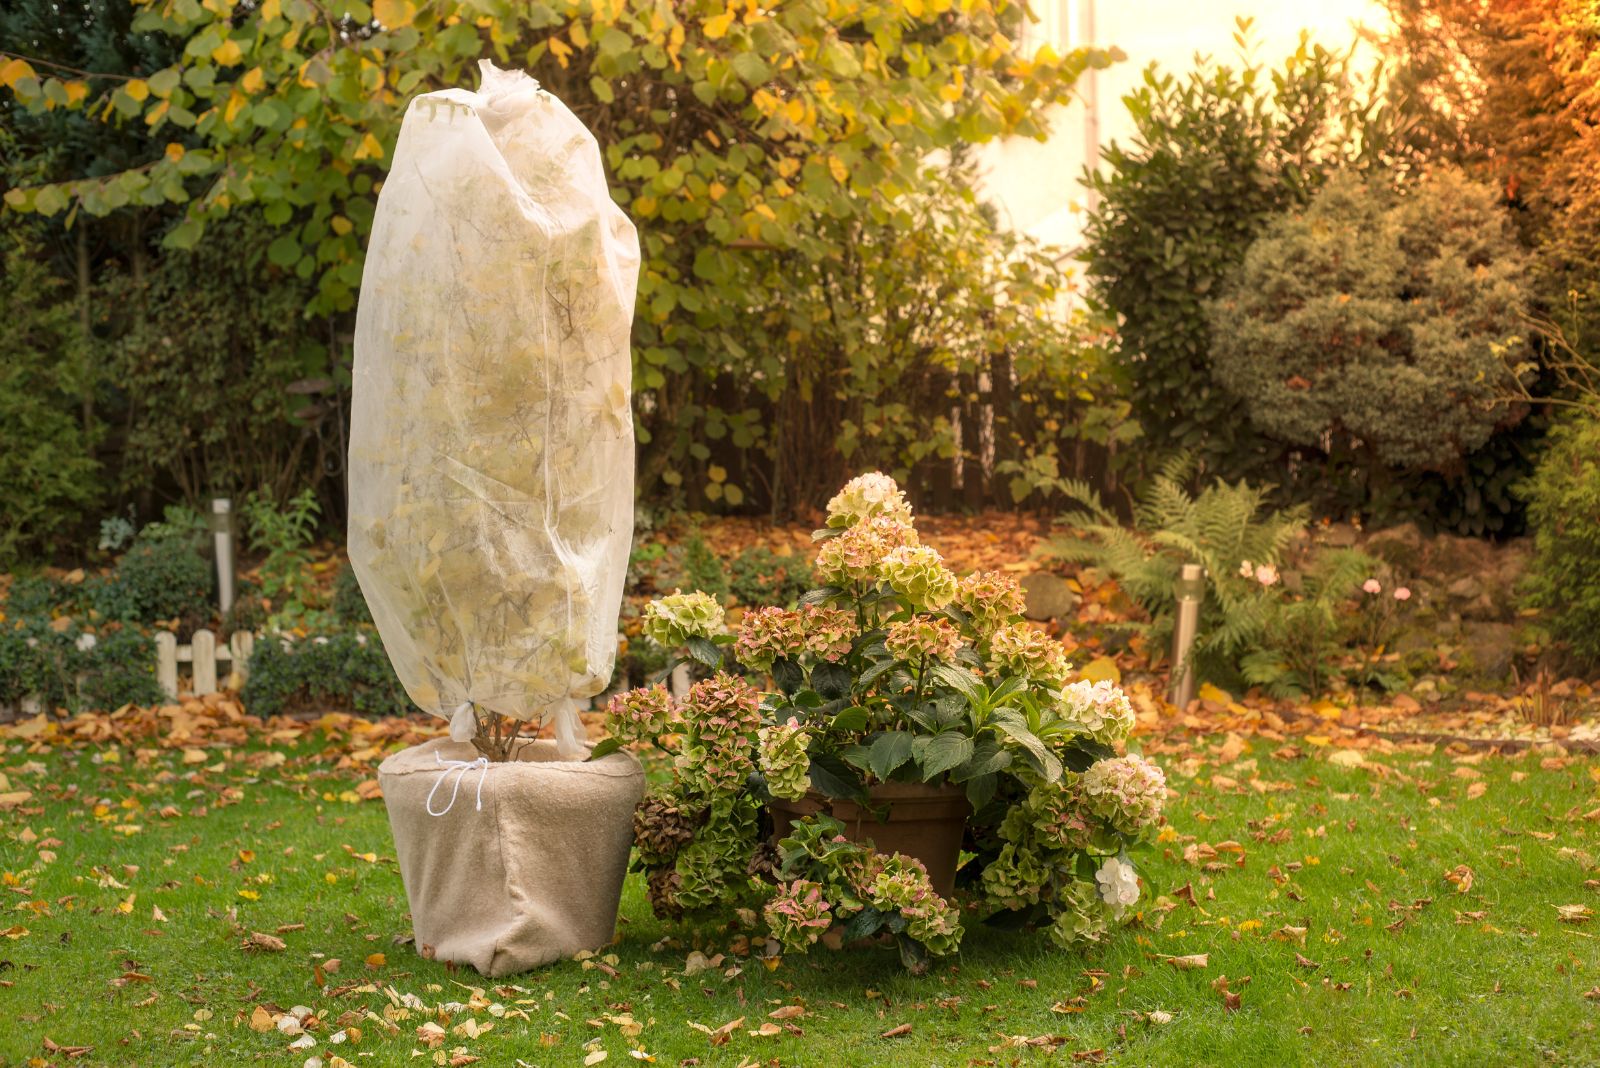 a perennial wrapped in a sack in the garden